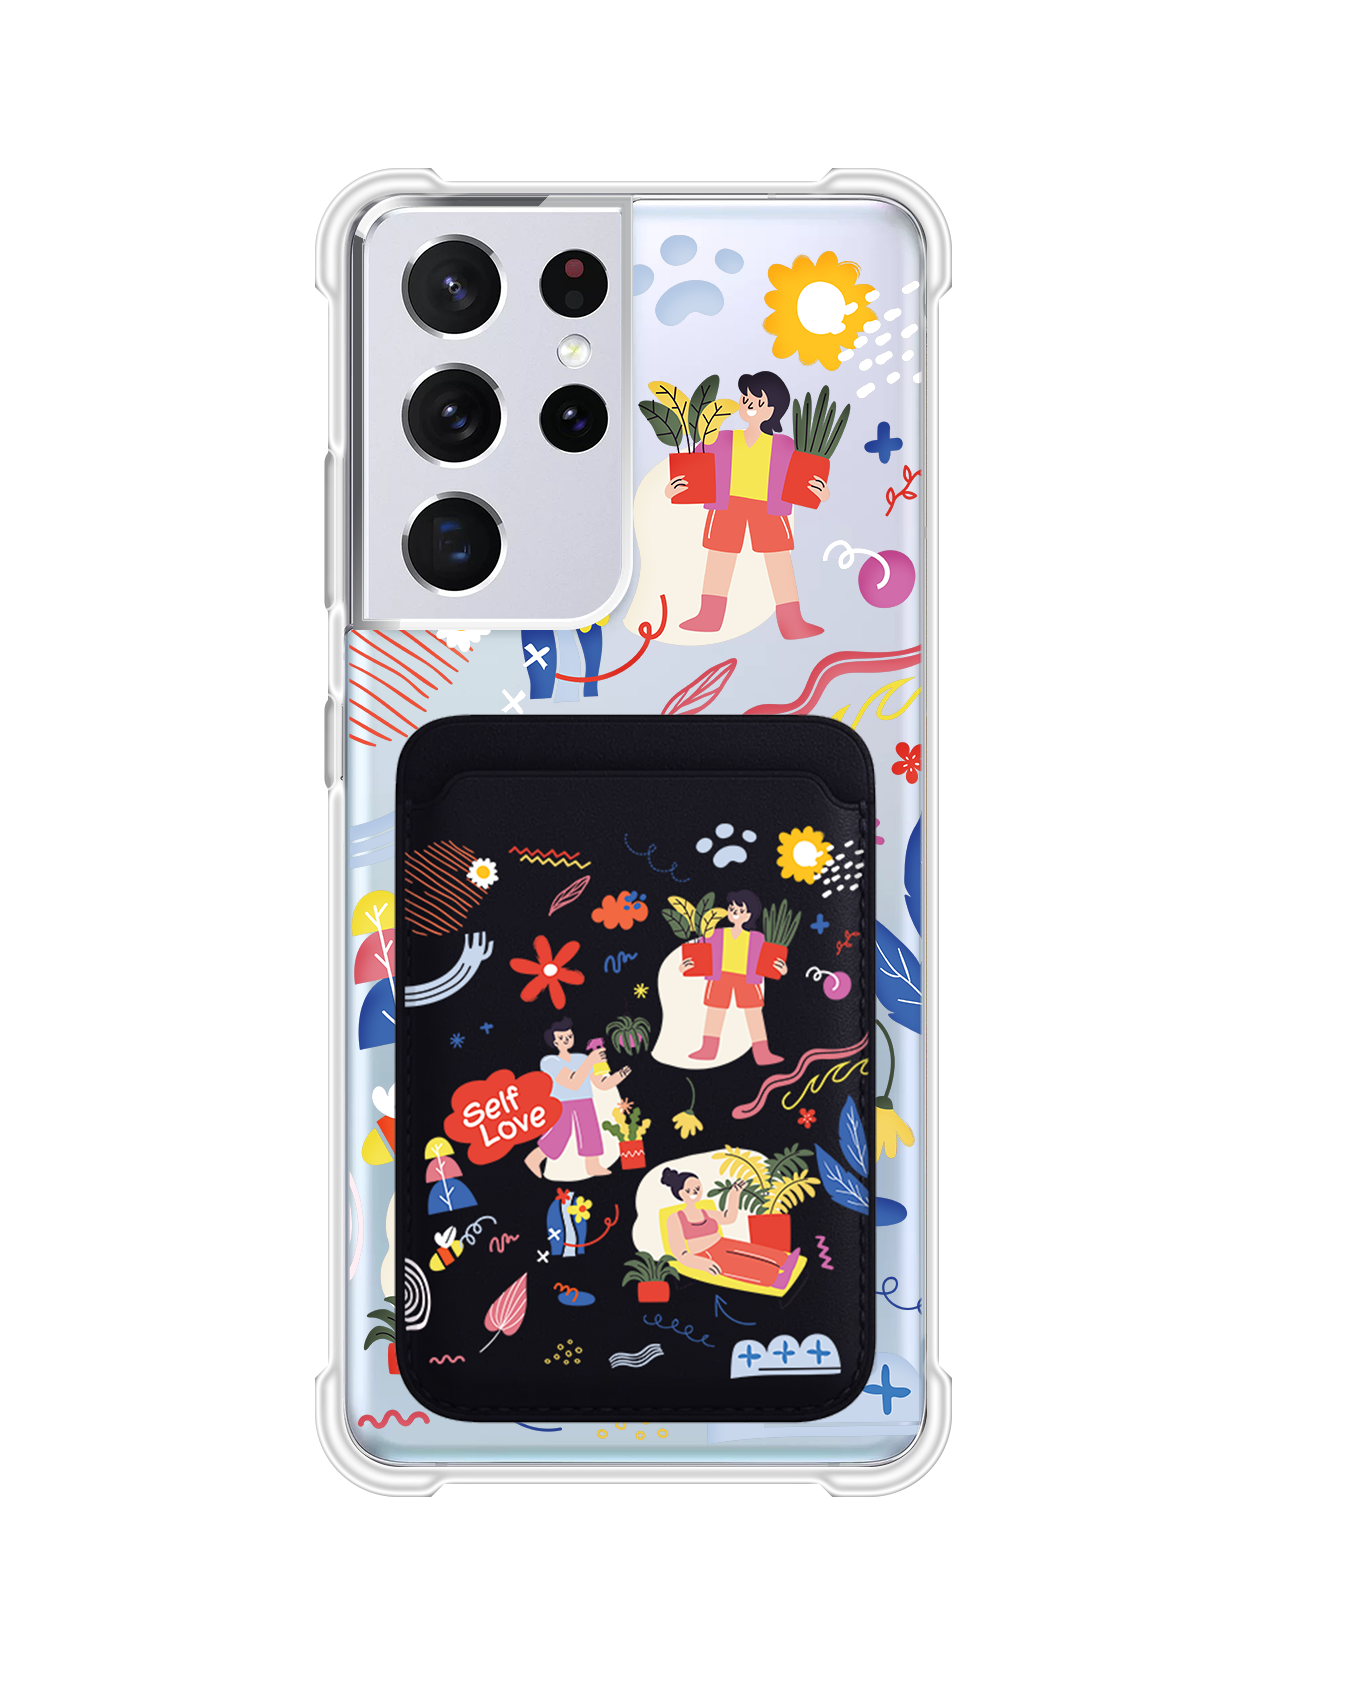 Android Magnetic Wallet Case - Self Love Sticker Pack 1.0